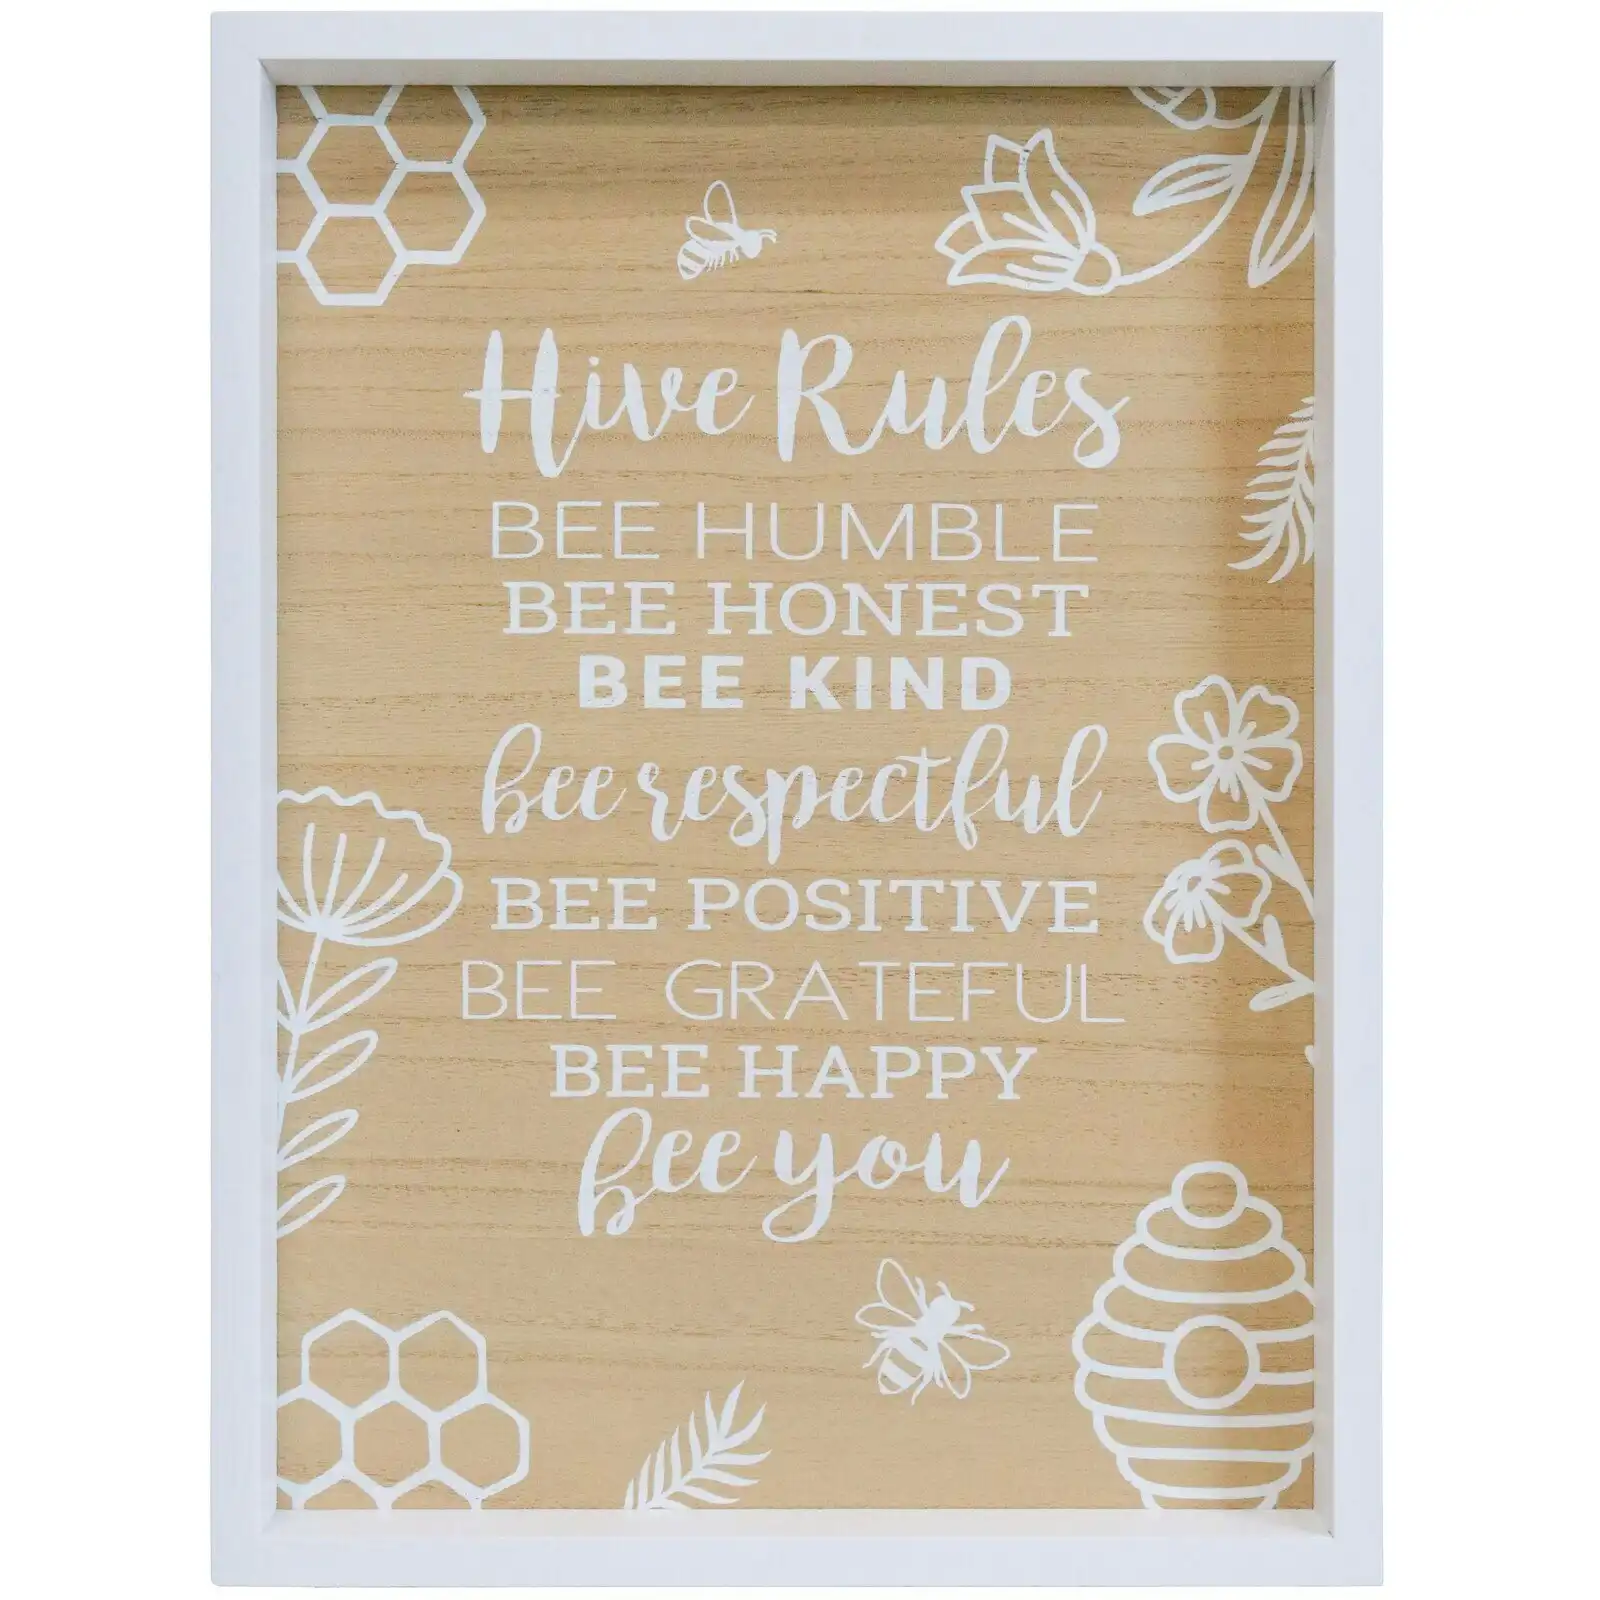 LVD 24cm MDF Hive Rules Sign Wall Hanging Home/Room Decor Plaque Shelf Display